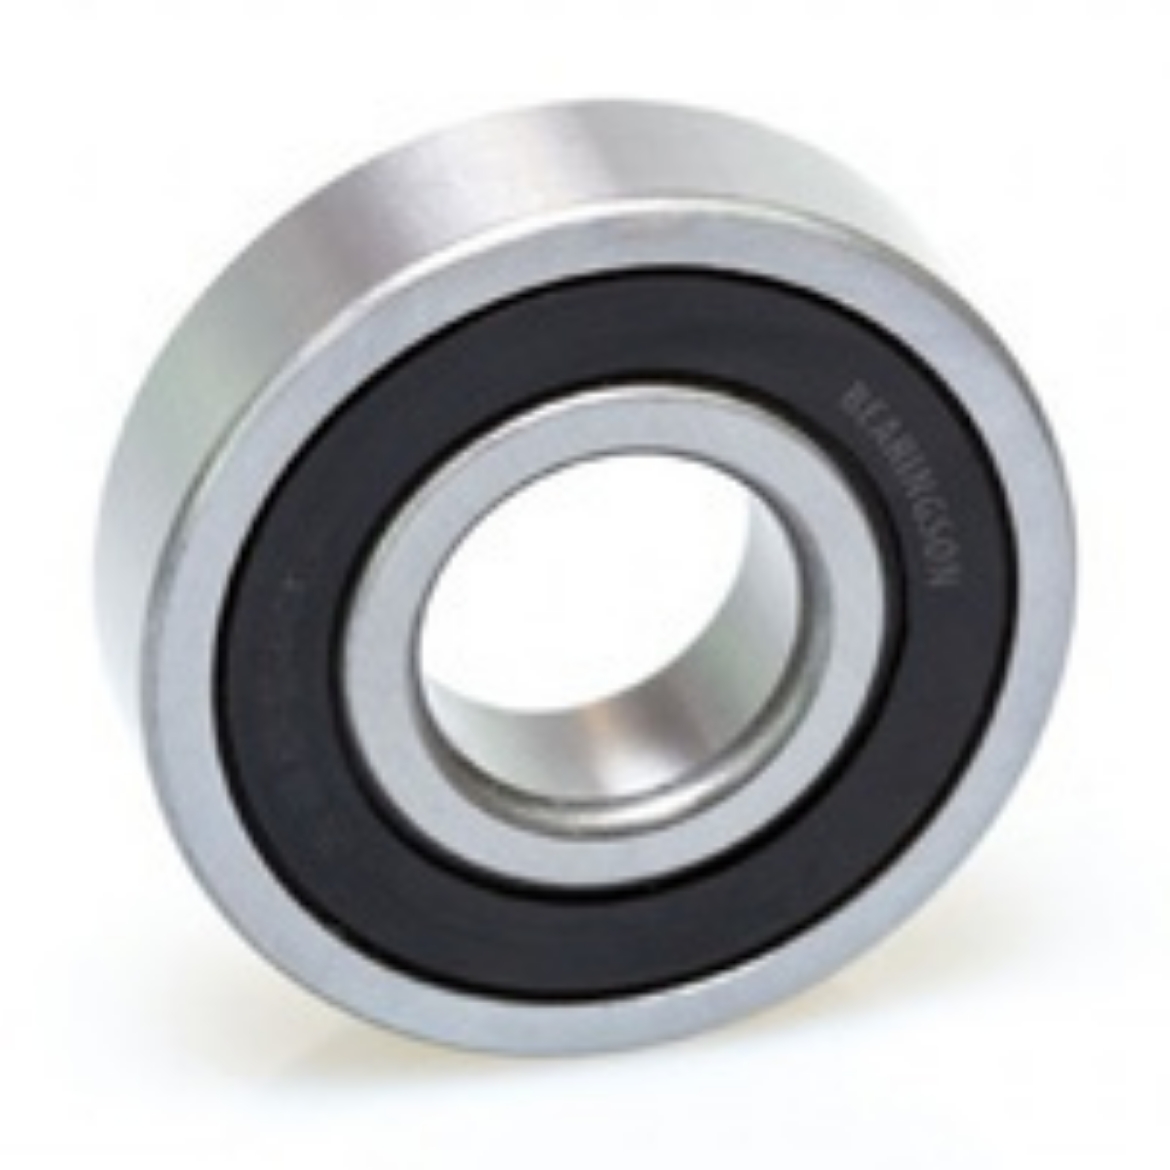 Picture of BALL BEARING METRIC 3/4"x40x12